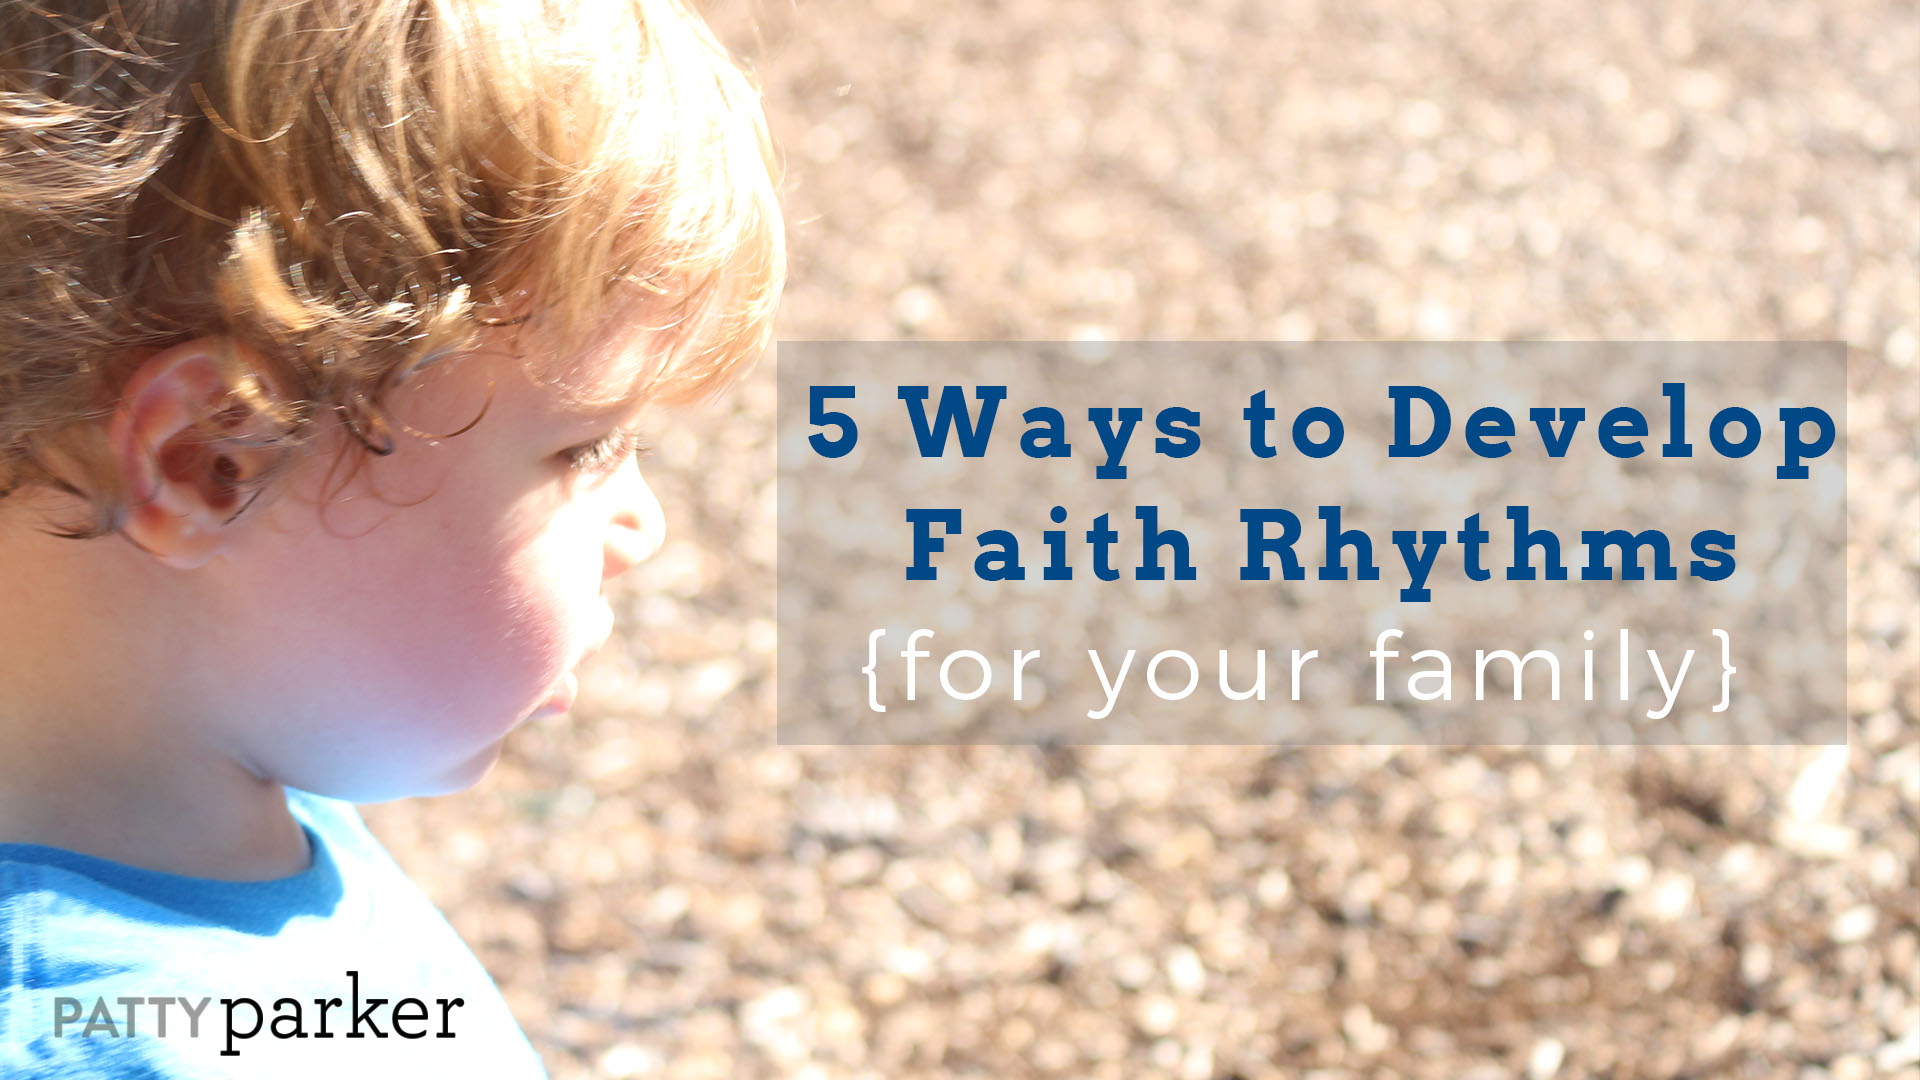 How do we help our children grow in their relationship with Jesus? Here are 5 ways we can help our children create faith rhythms.